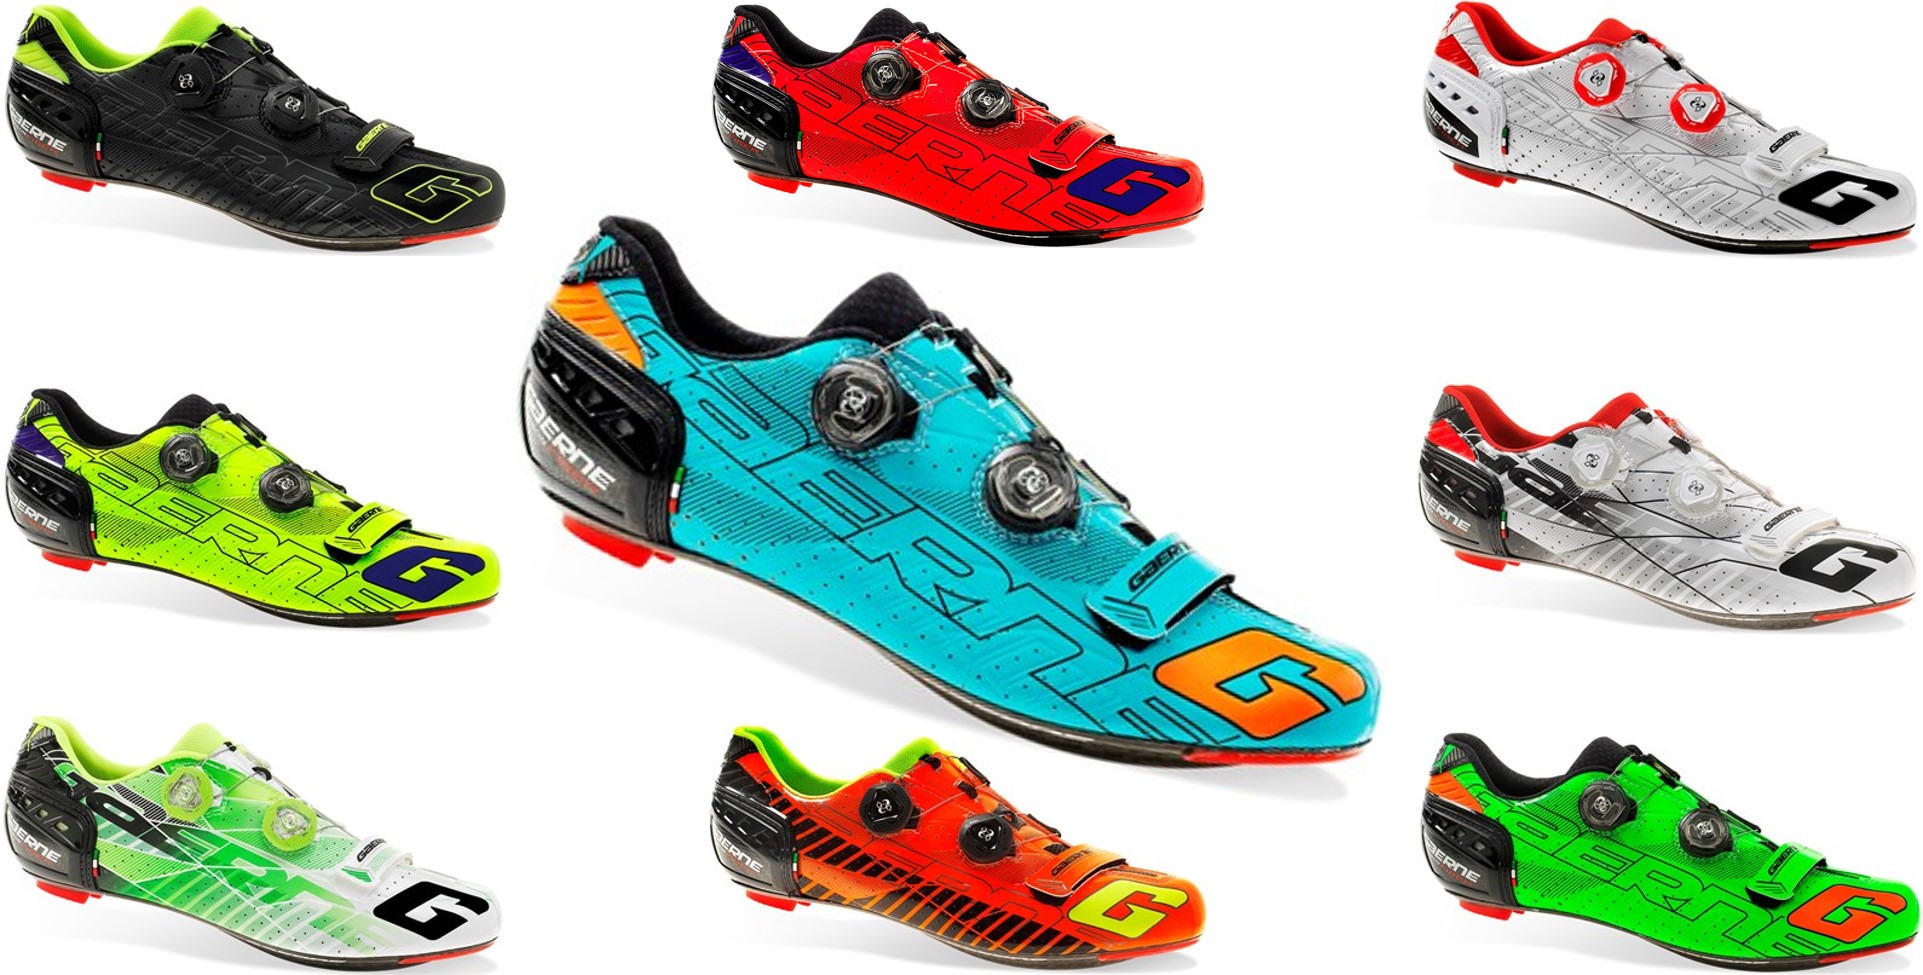 Gaerne Carbon G.Stillo Road Cycling Shoes